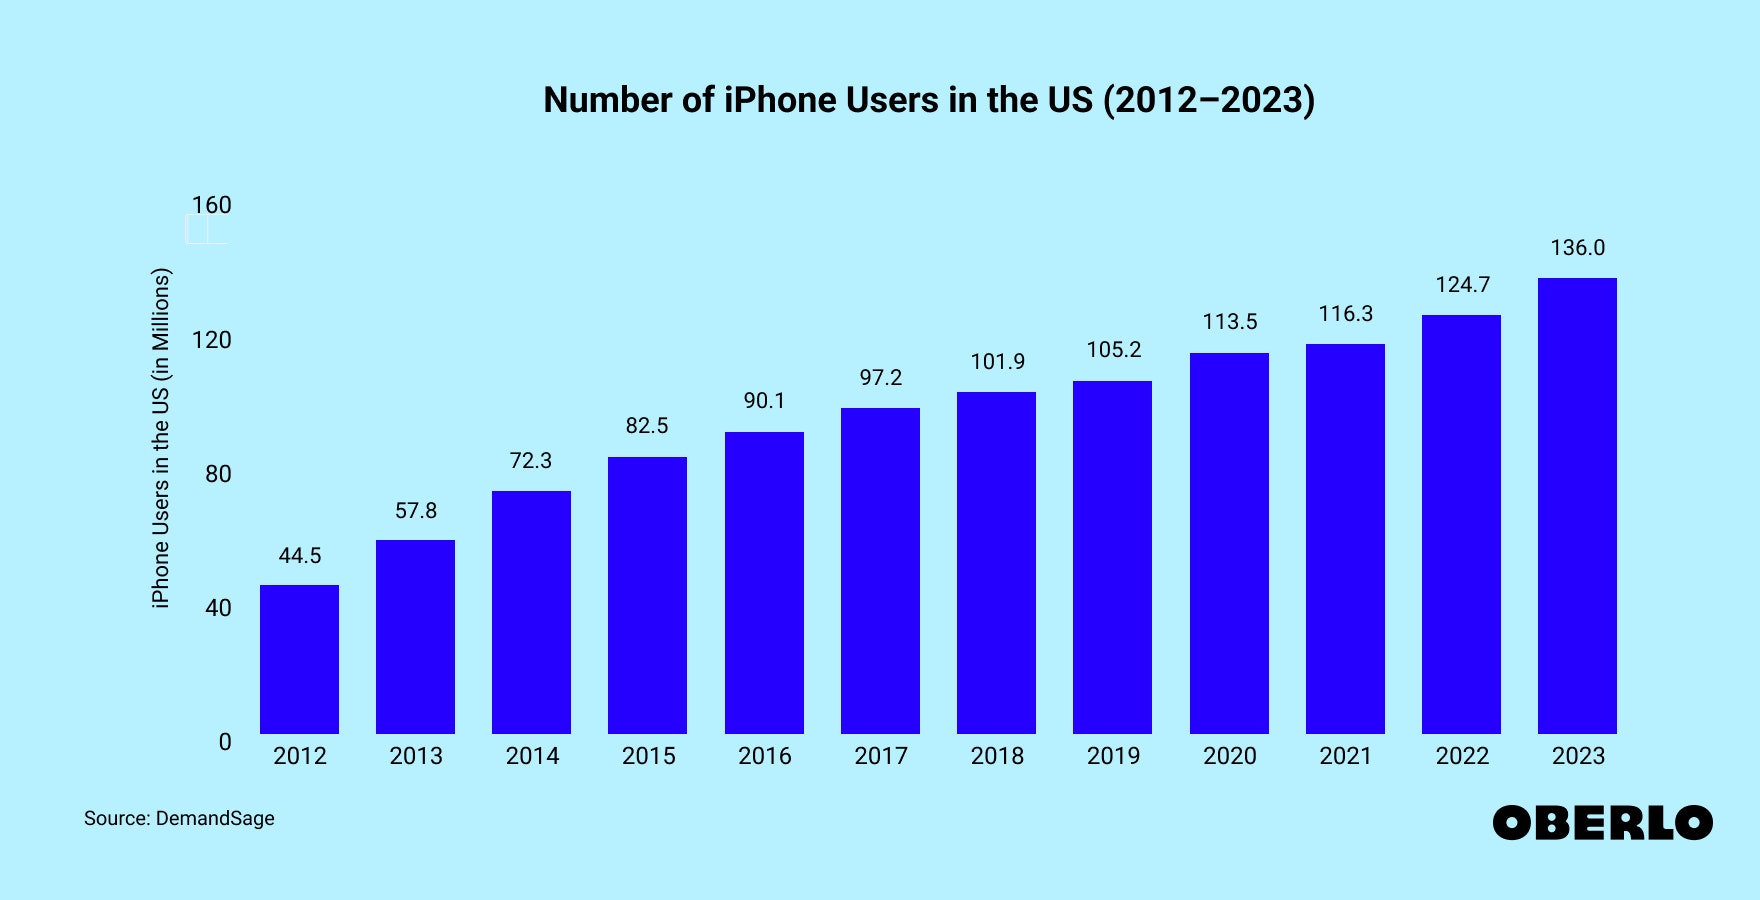 Chart showing: Number of iPhone Users in the US from 2012 to 2023